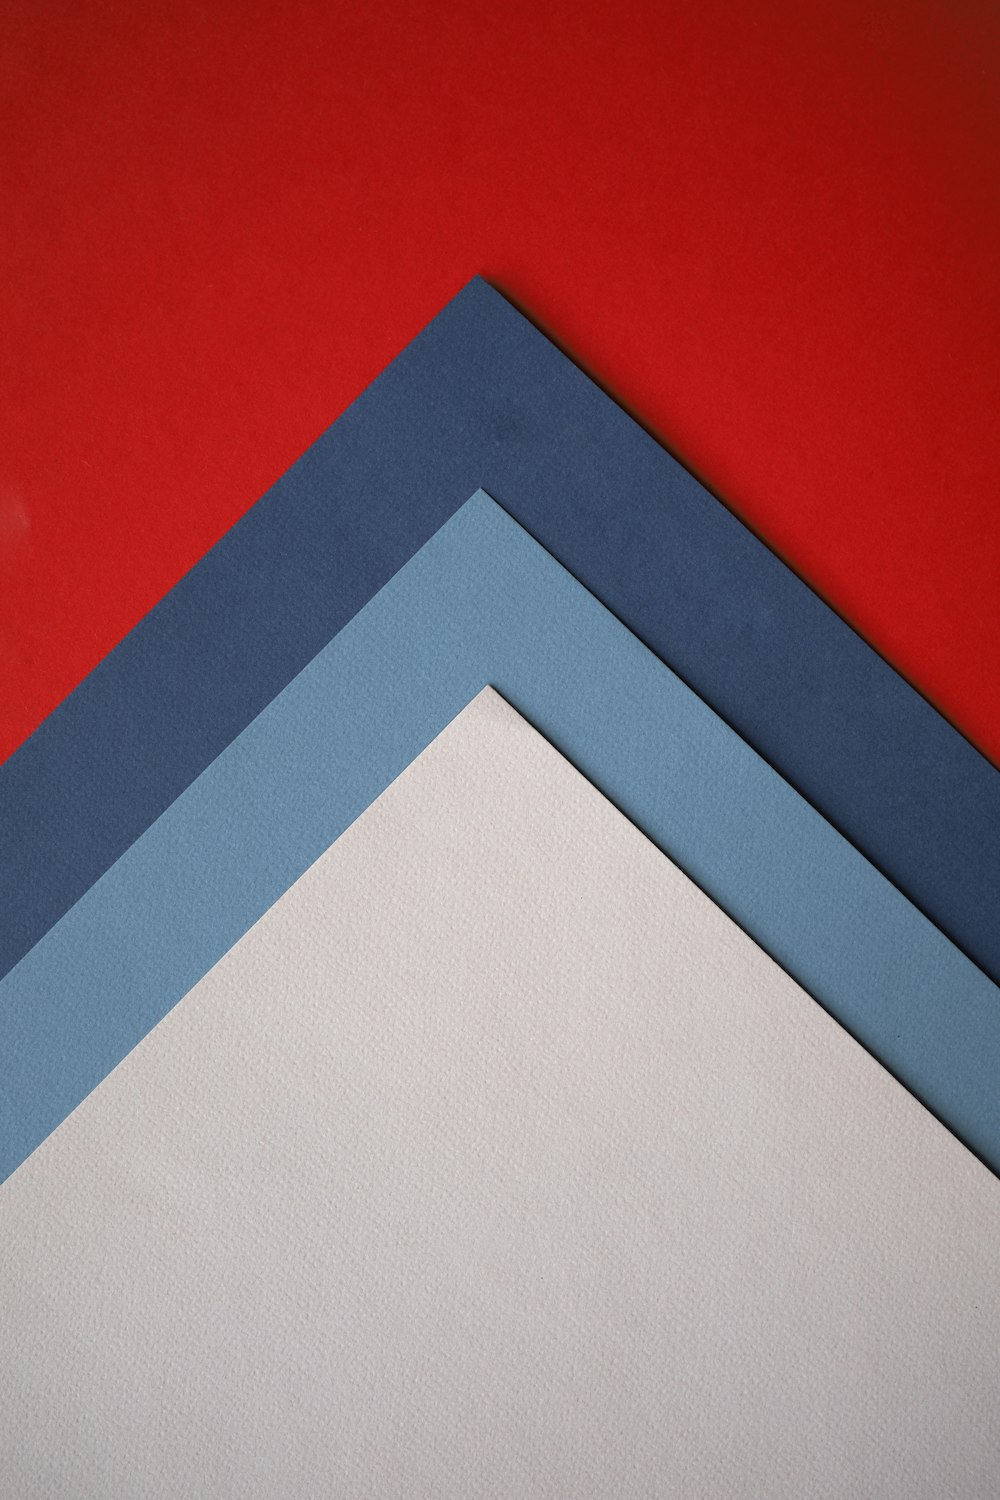 a close up of three different colors of paper